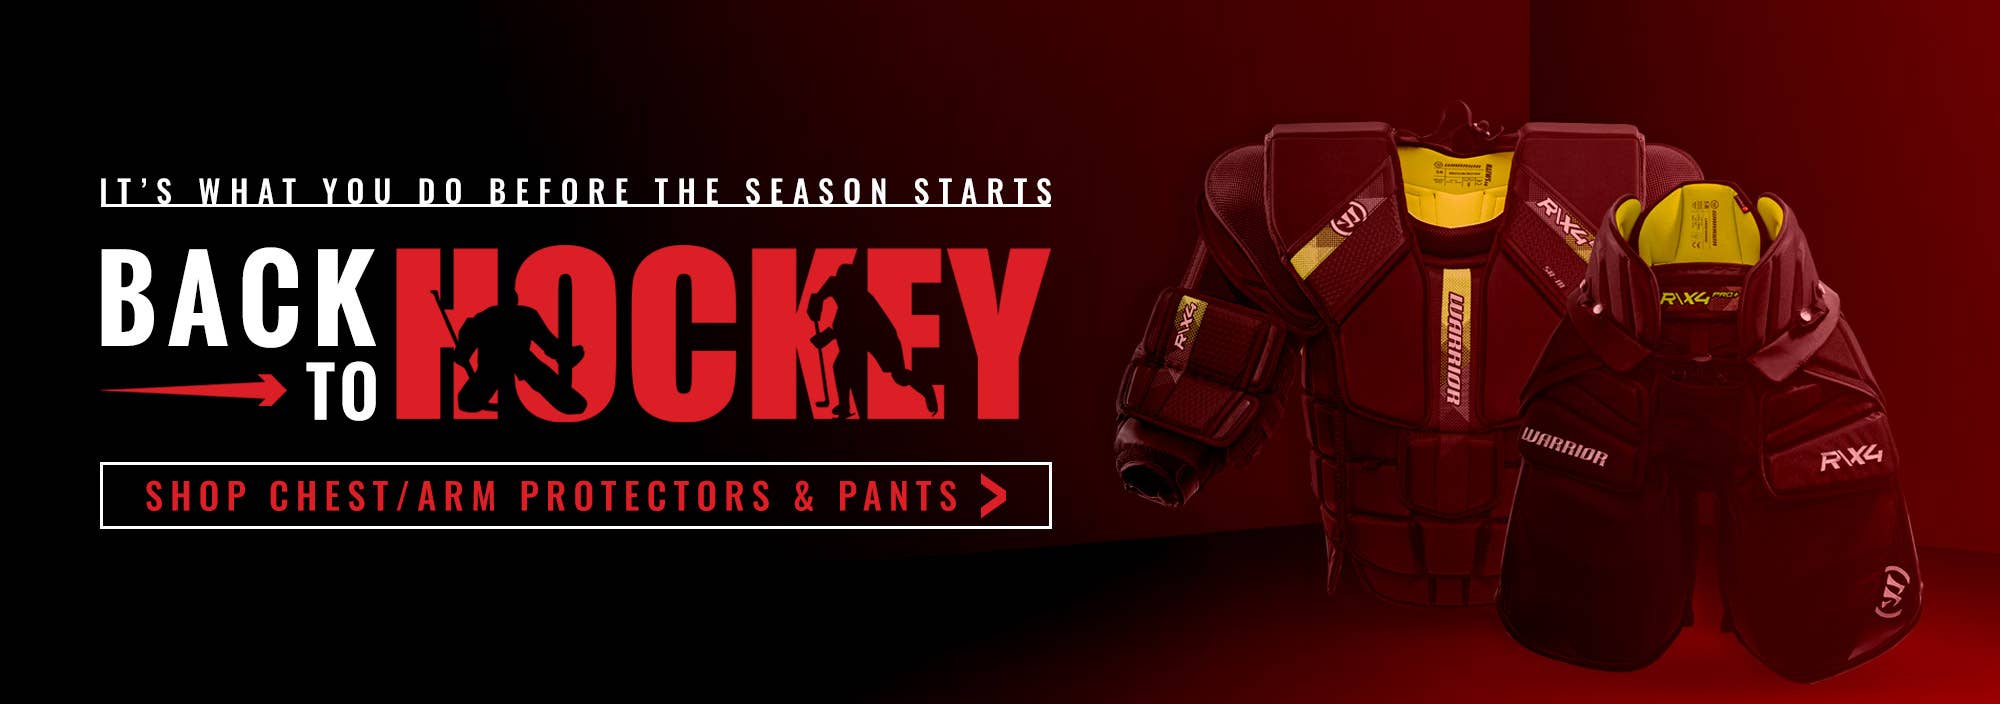 Back to Hockey: Goalie Chest & Arm Protectors and Pants